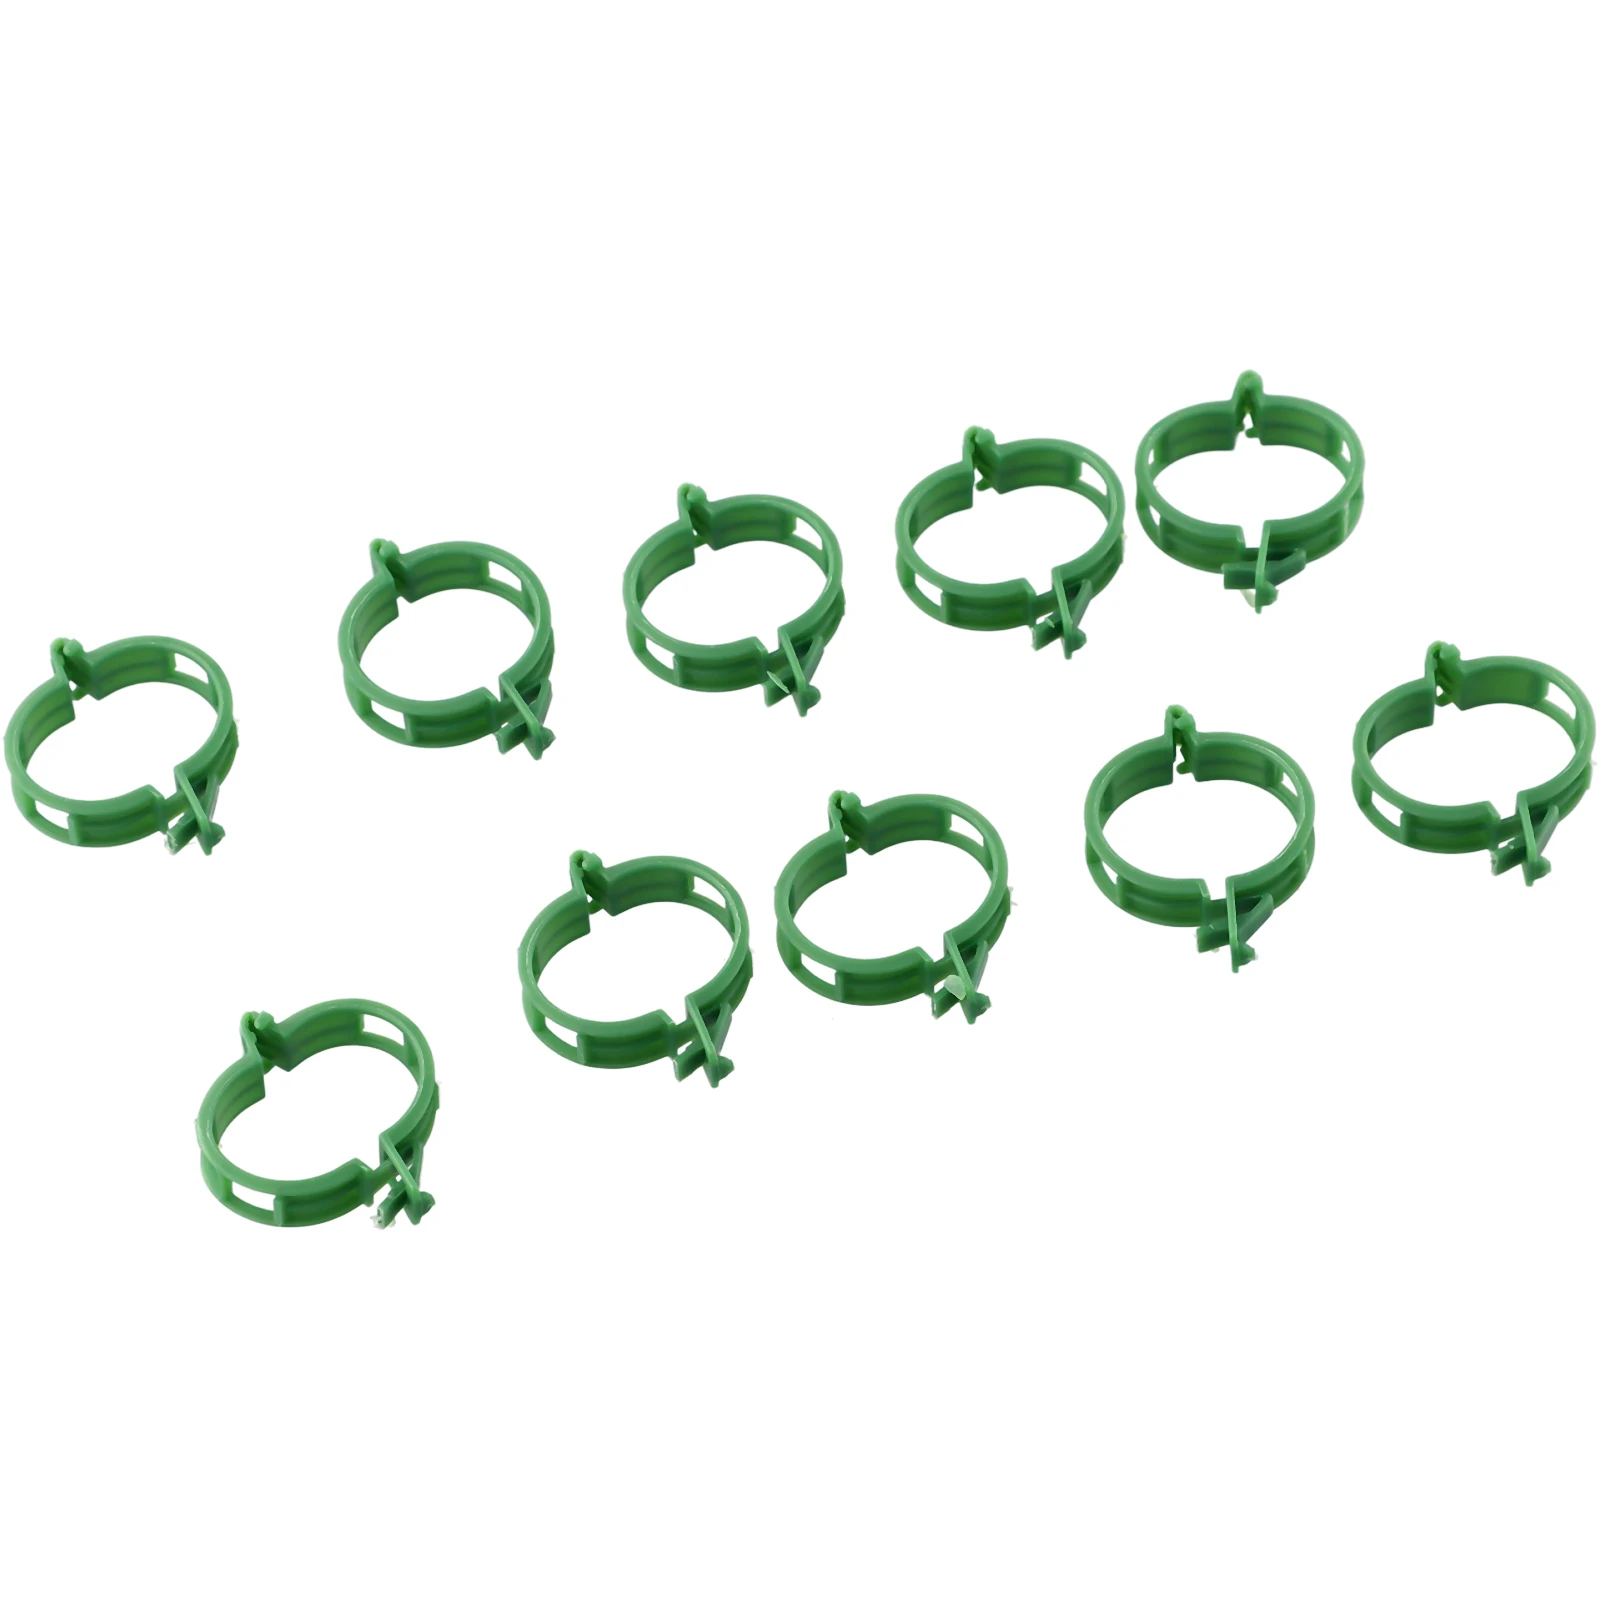 

100pcs Plastic Plant Clips Supports Connects Reusable Protection Grafting Fixing Tool Gardening Supplies For Vegetable Tomato